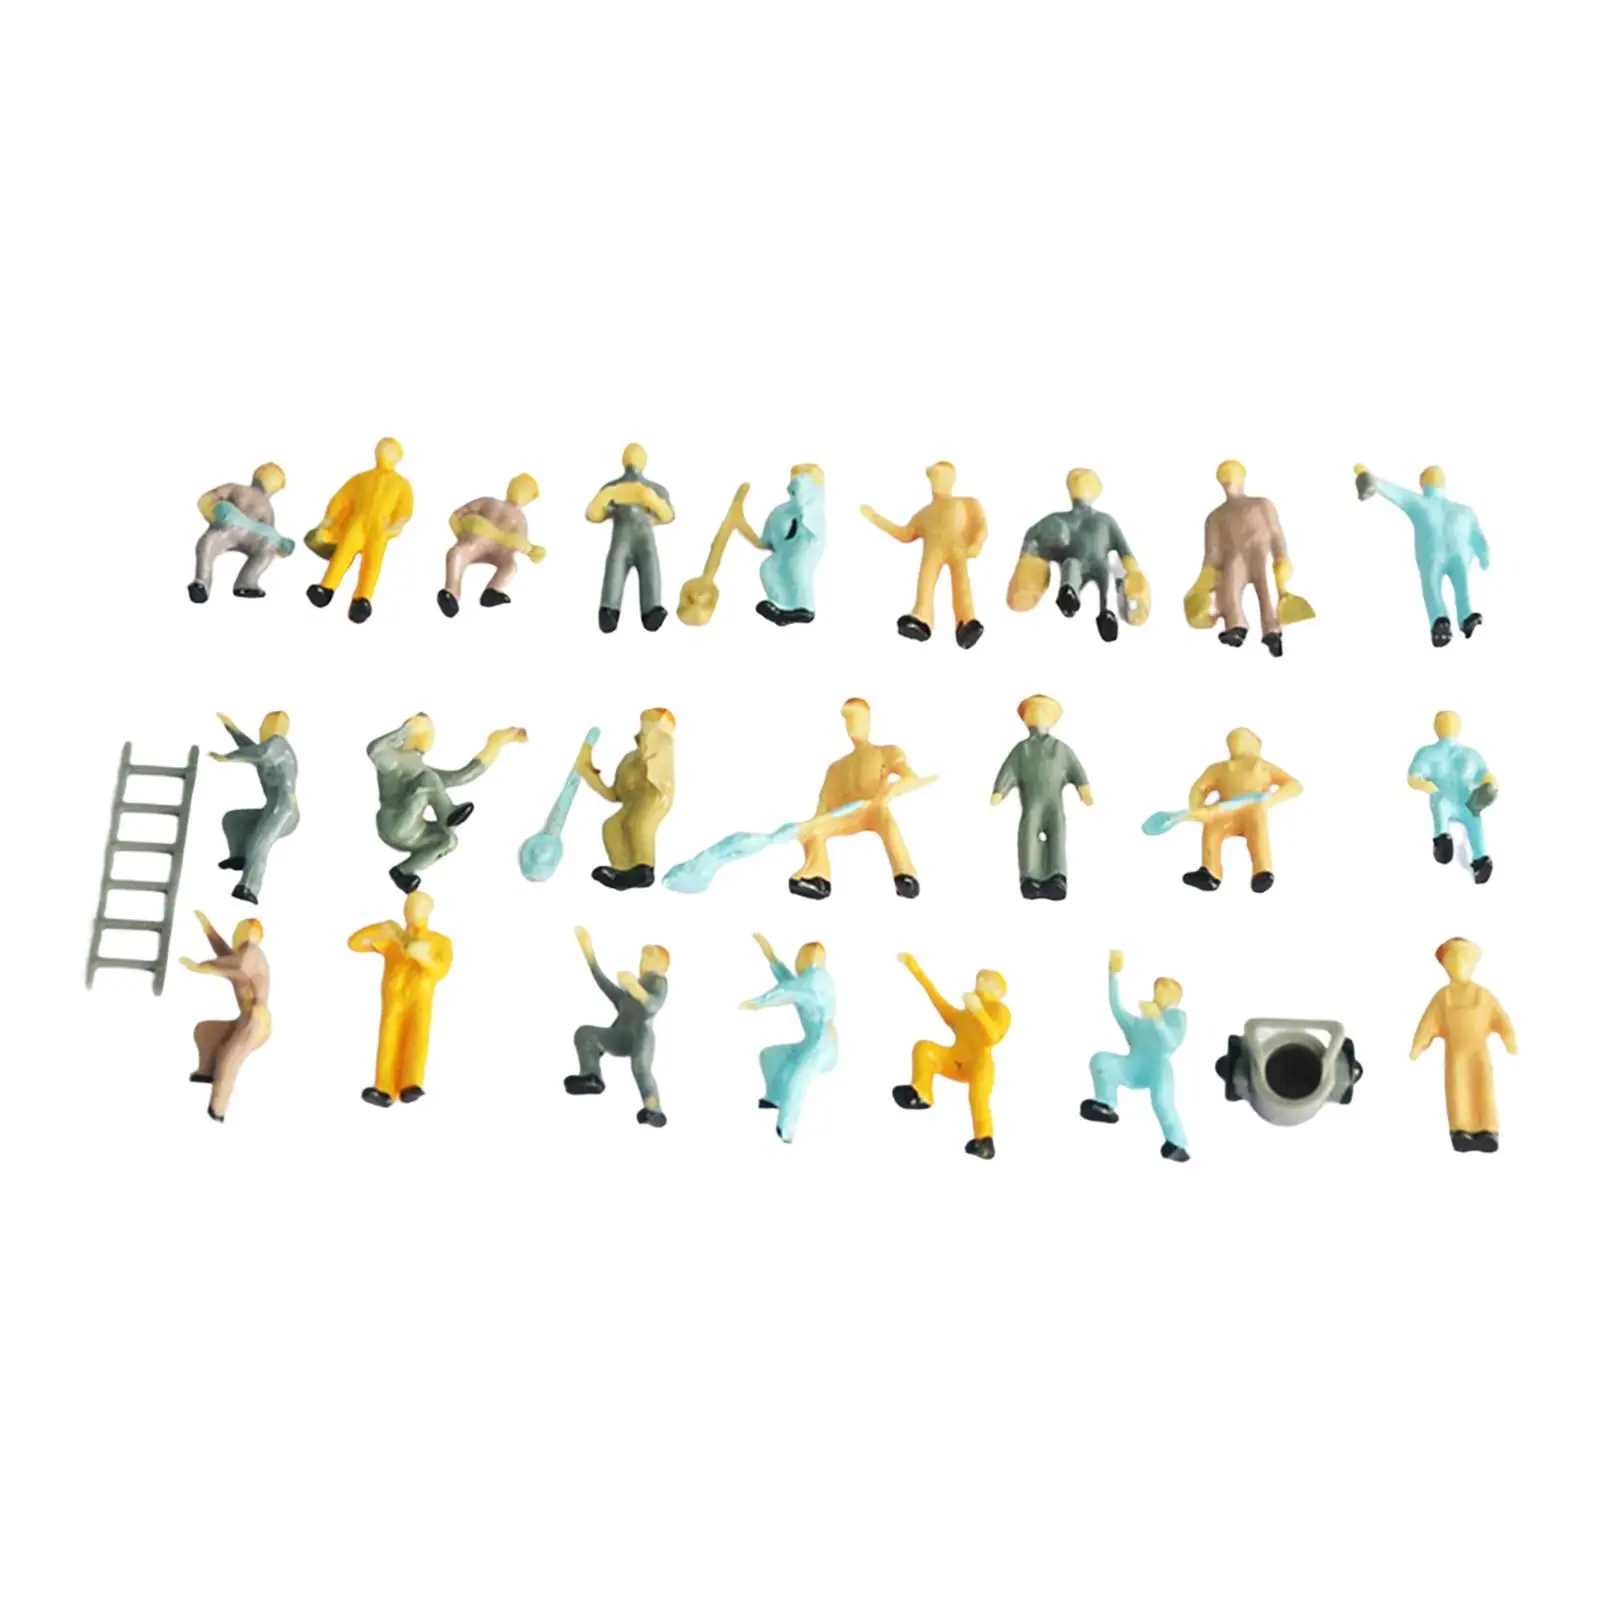 25x 1/87 Miniature Model Railroad Worker Figures Train Track HO Scale Layout Sand Table Scene Hand Painted Figurines Supplies